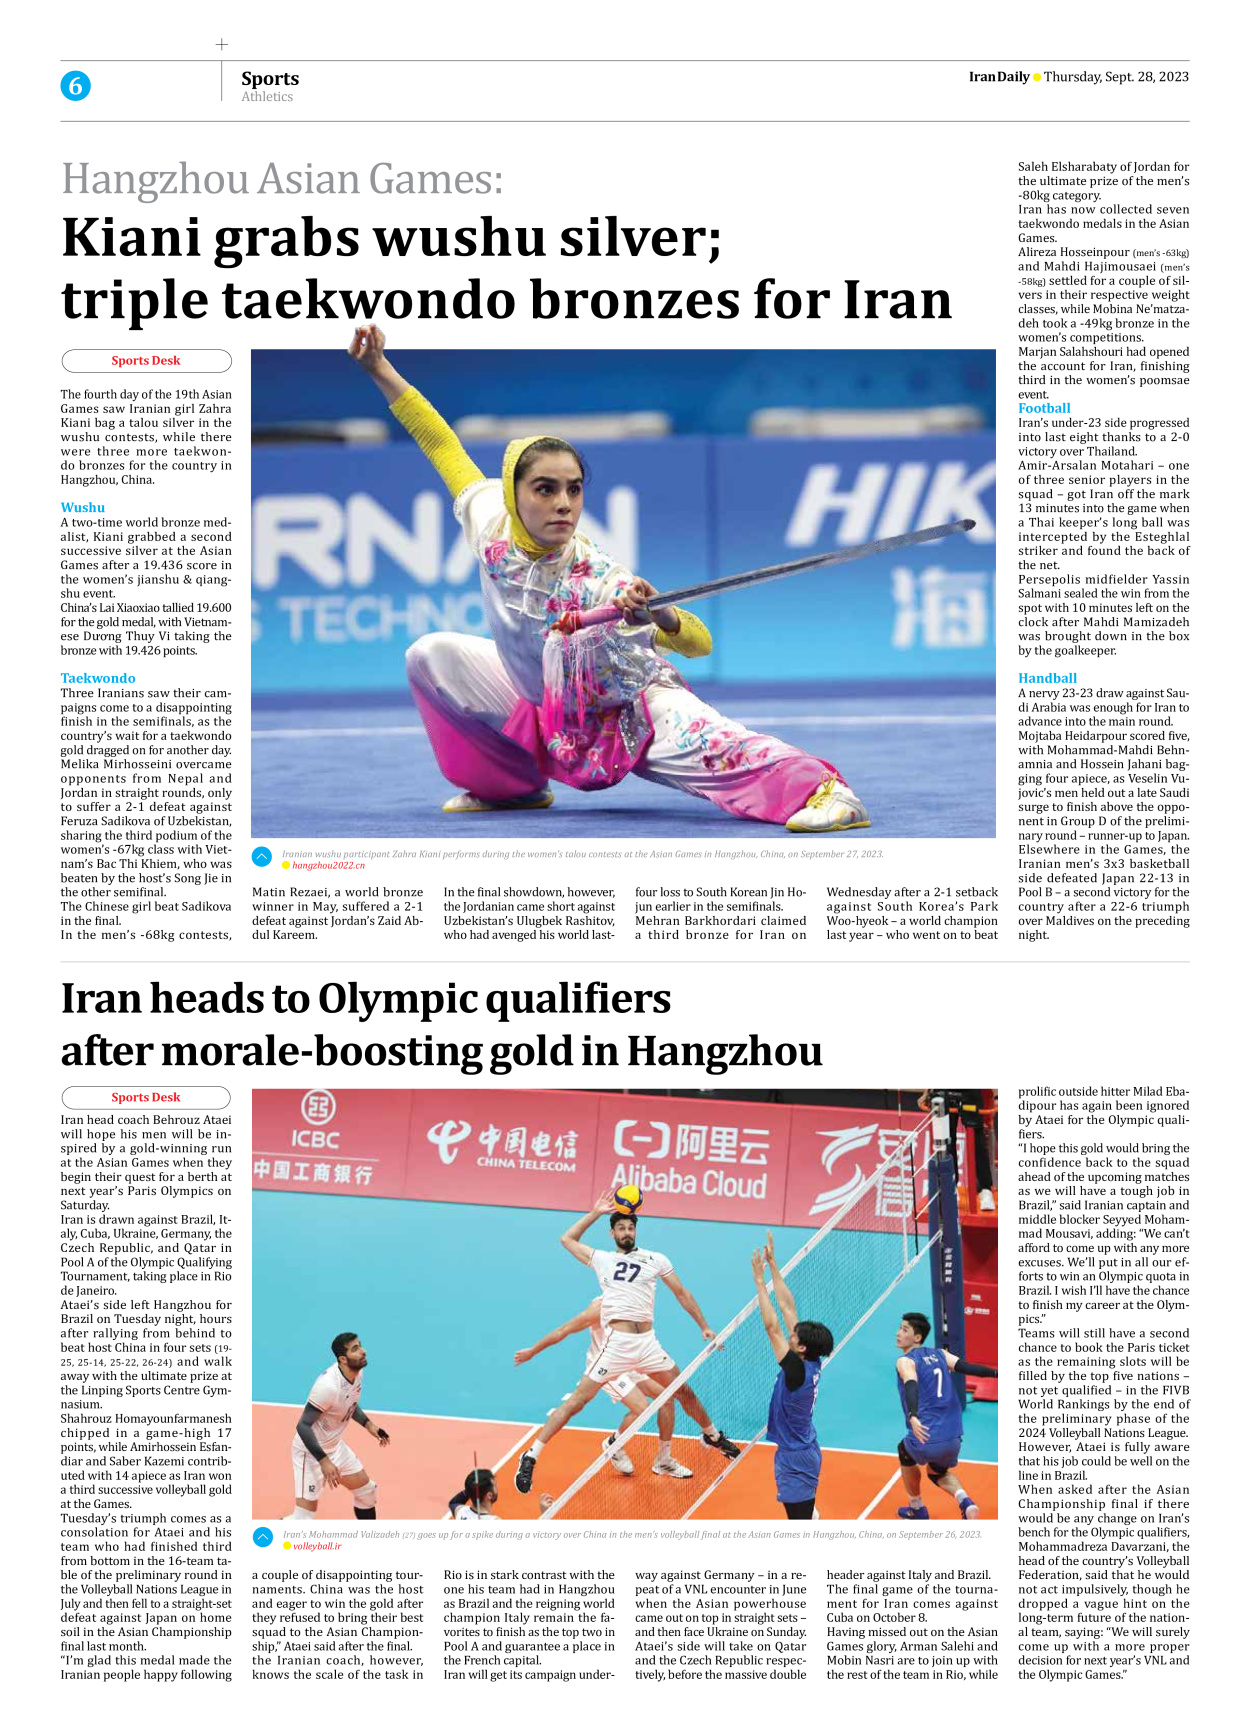 Iran Daily - Number Seven Thousand Three Hundred and Ninety Five - 28 September 2023 - Page 6